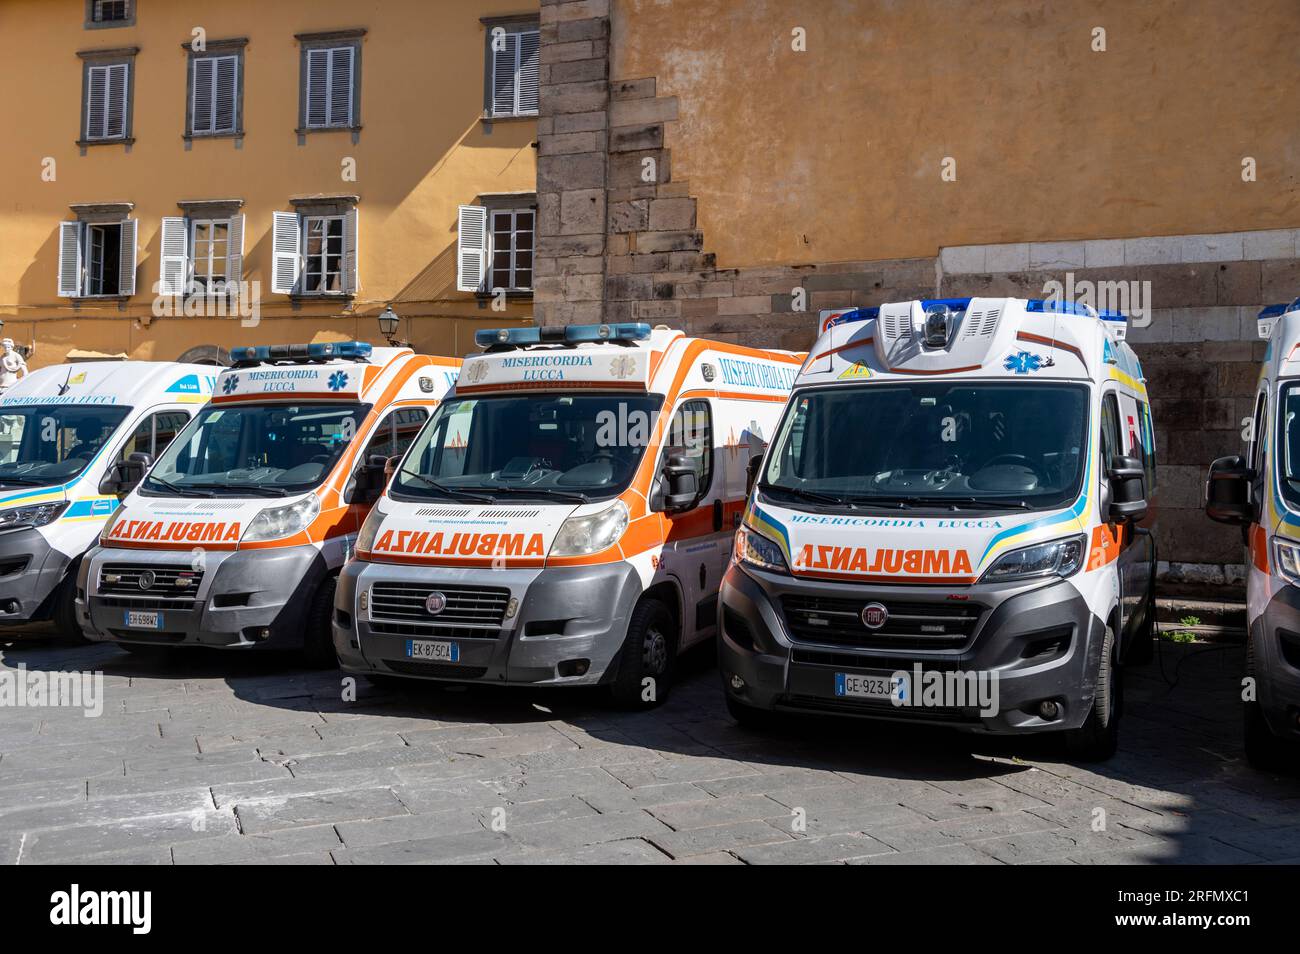 A fleet of parked ambulances in the city of Lucca in the Tuscany region of Italy. Stock Photo